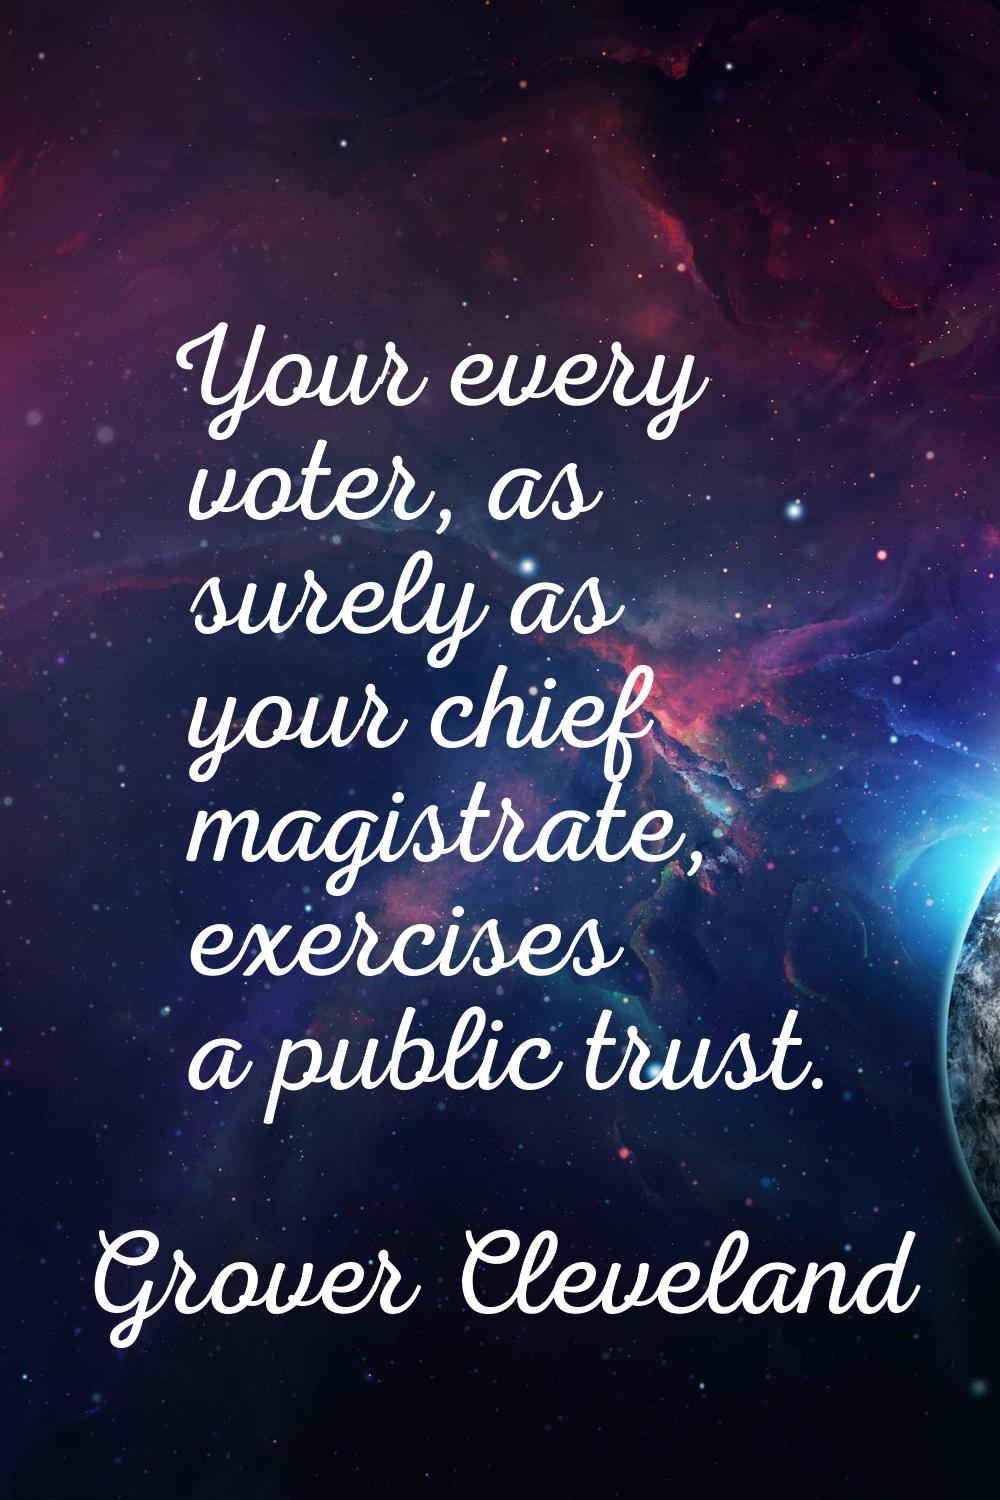 Your every voter, as surely as your chief magistrate, exercises a public trust.